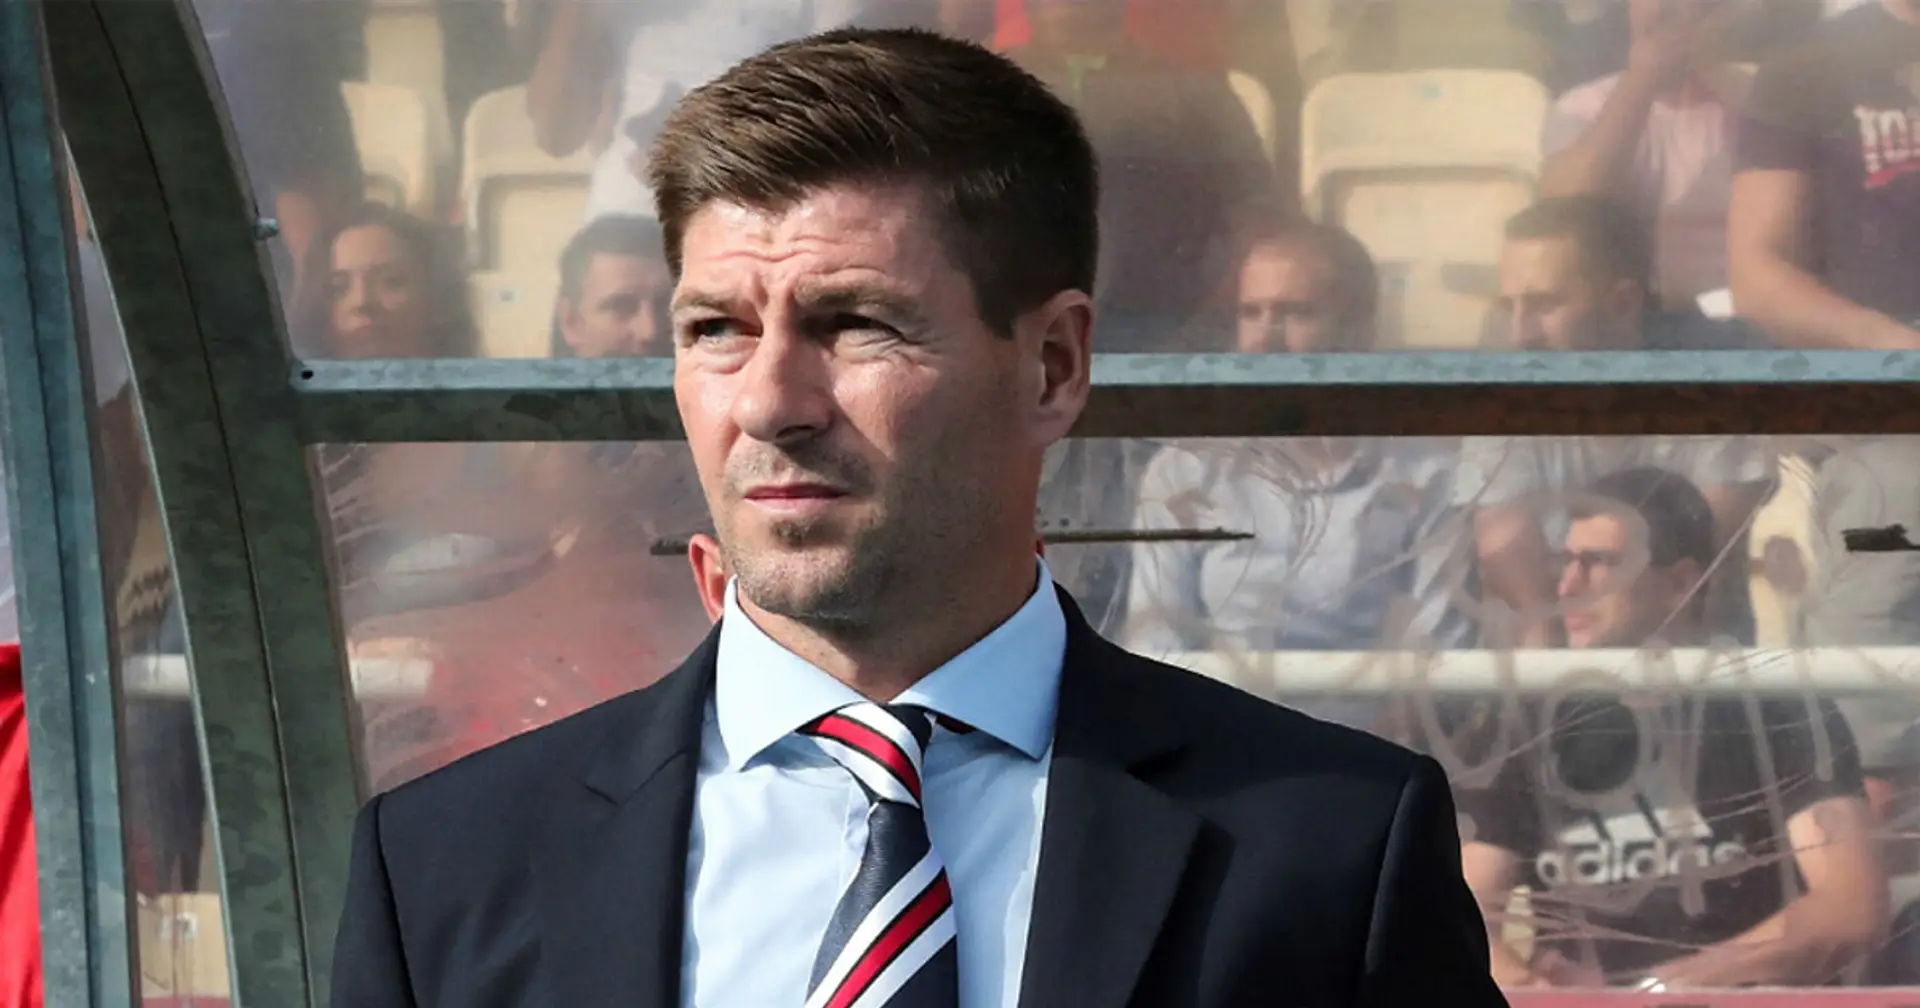 'That’s probably what he’s striving for': Rangers striker Jermaine Defoe predicts Steven Gerrard's return to Anfield as manager